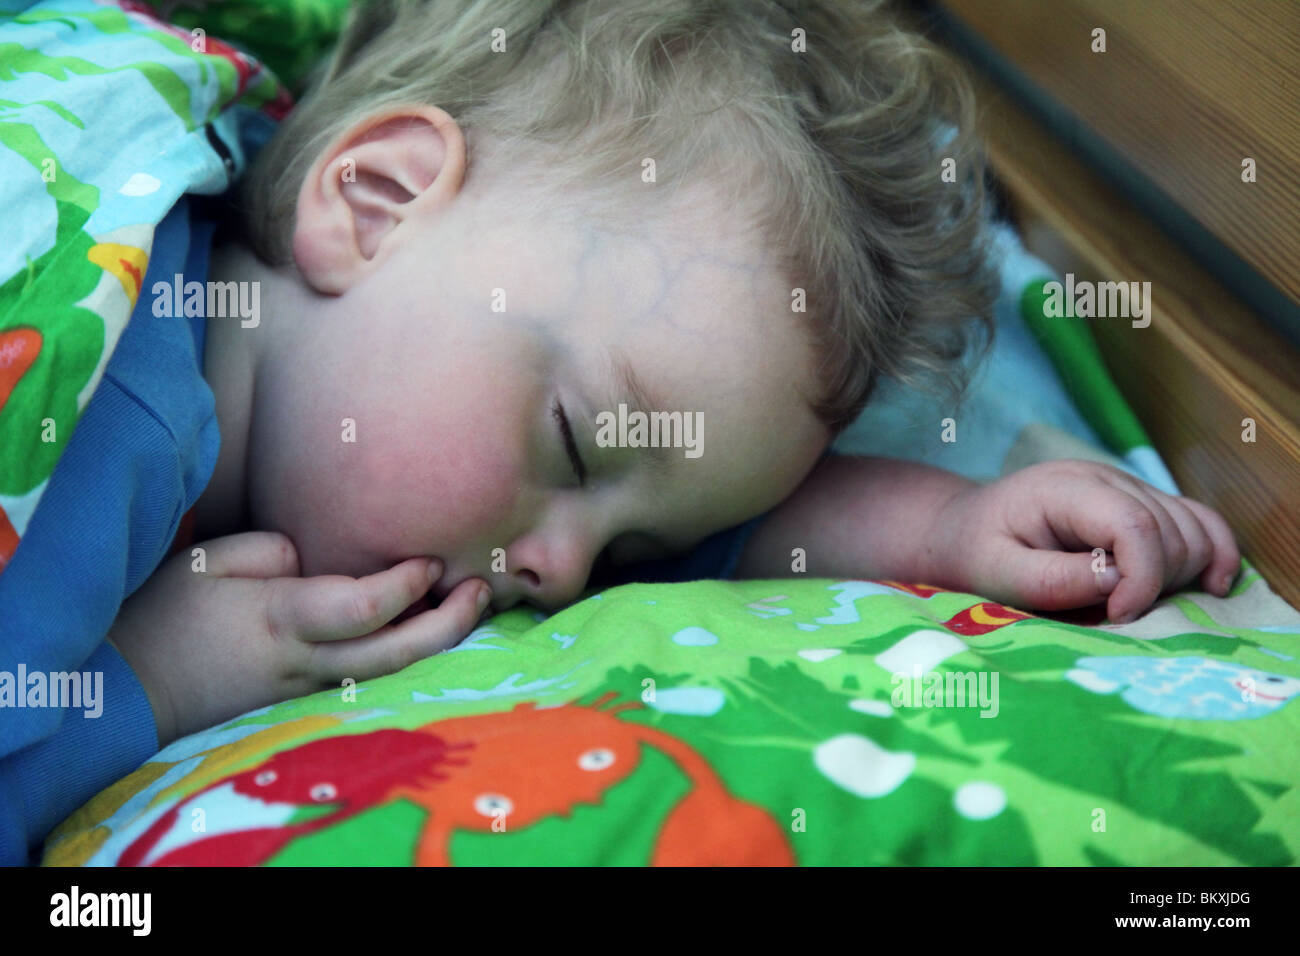 TWO YEAR OLD BOY EXHAUSTED SLEEPING WITH ROSY CHEEKS: A two year old baby boy child toddler asleep in the afternoon model released Stock Photo